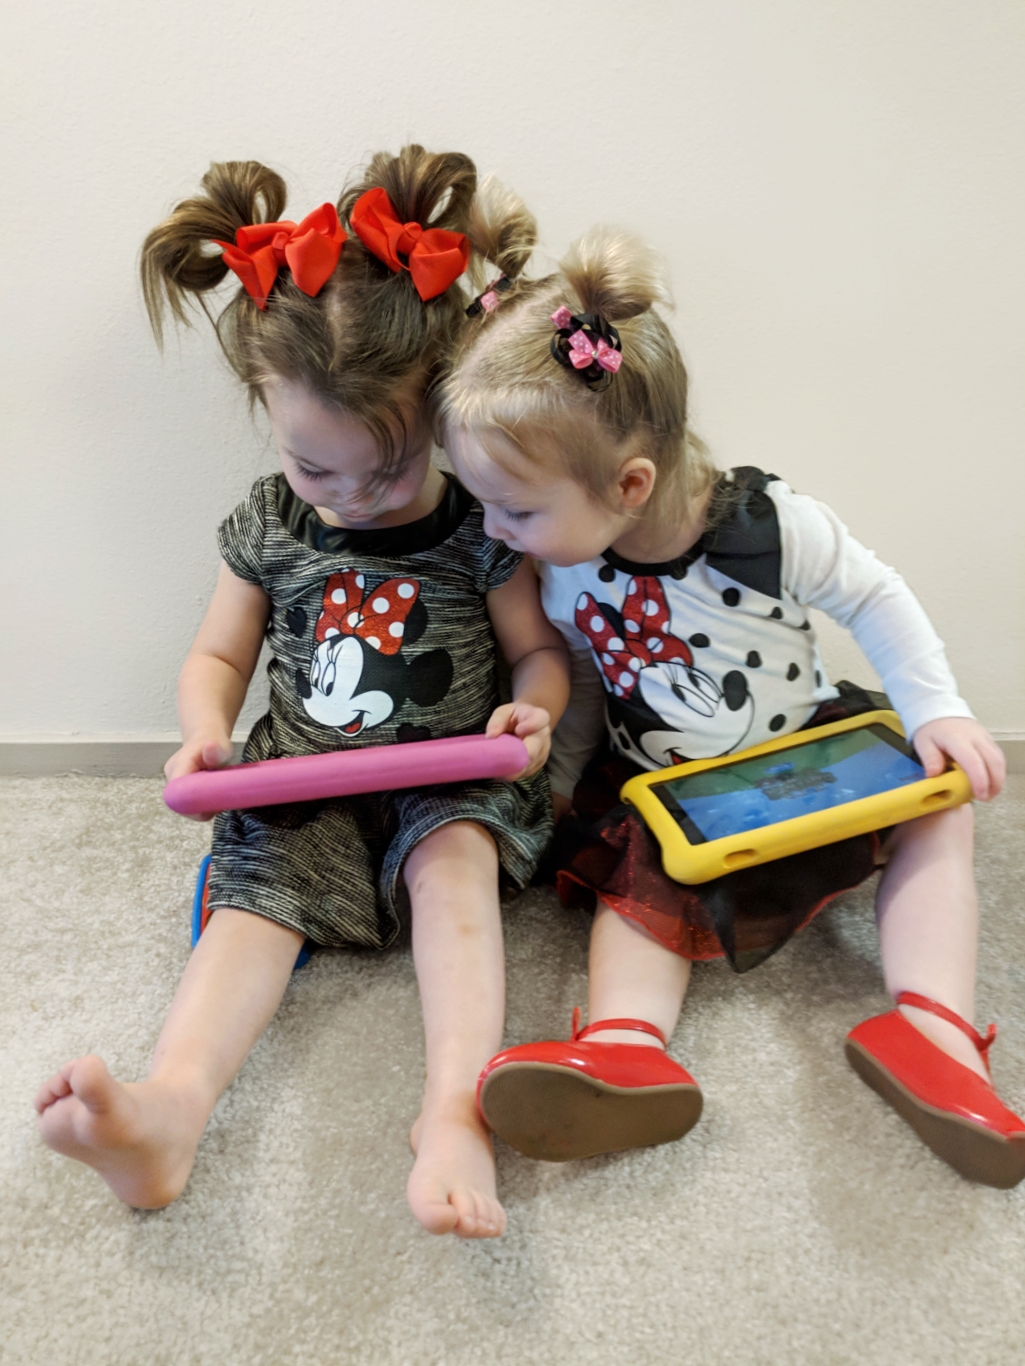 How to set up an  Kindle for children